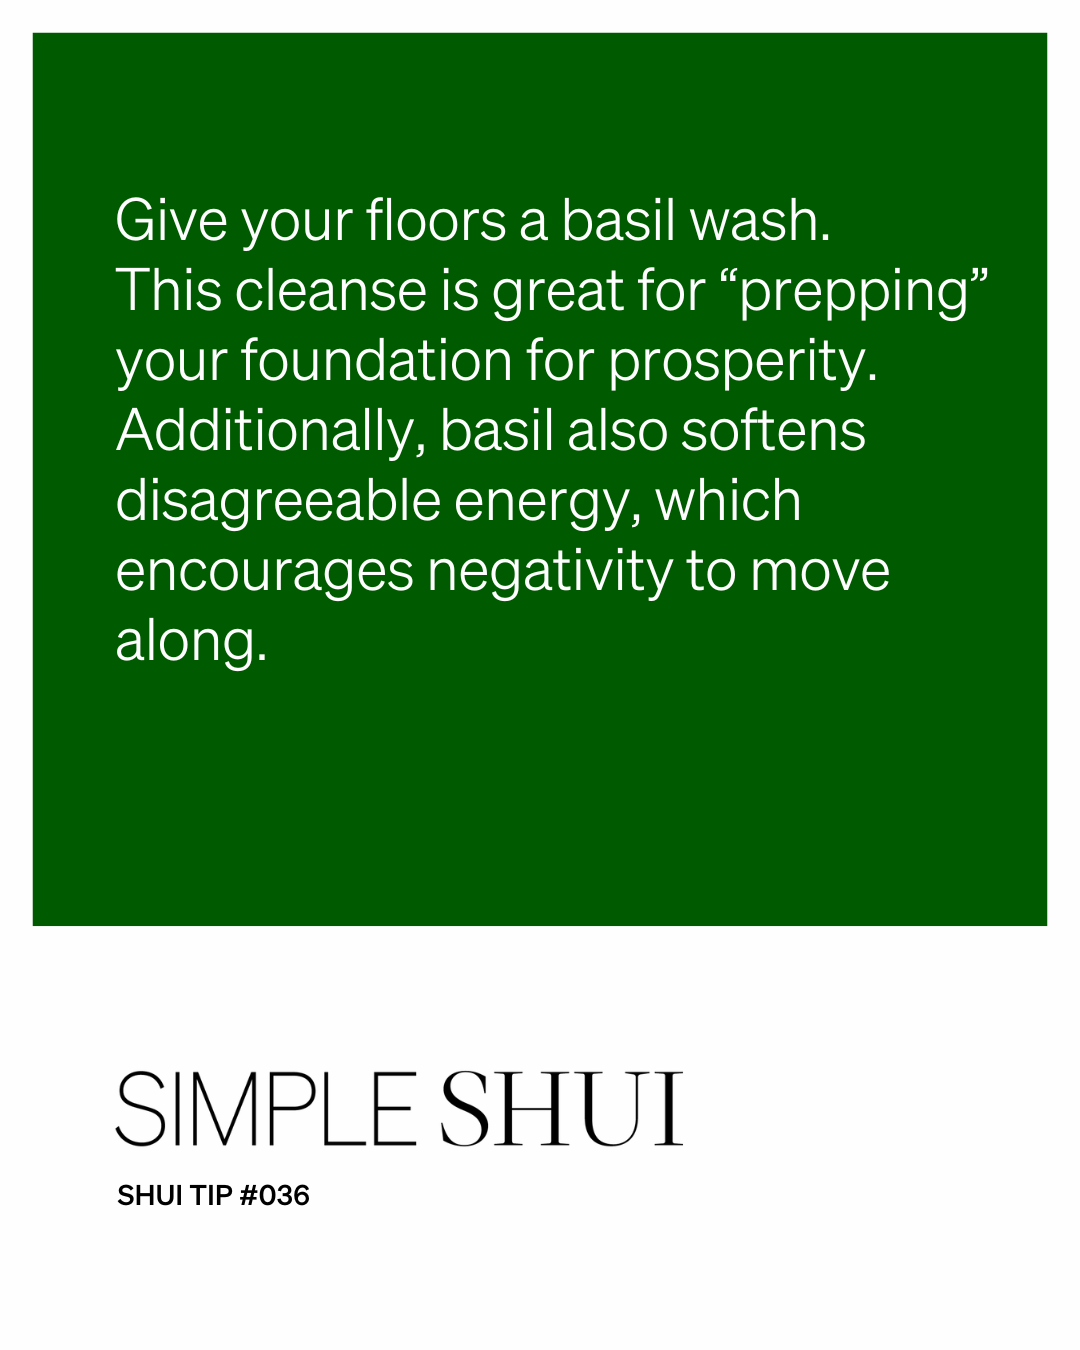 simple shui tip: give your floors a basil wash